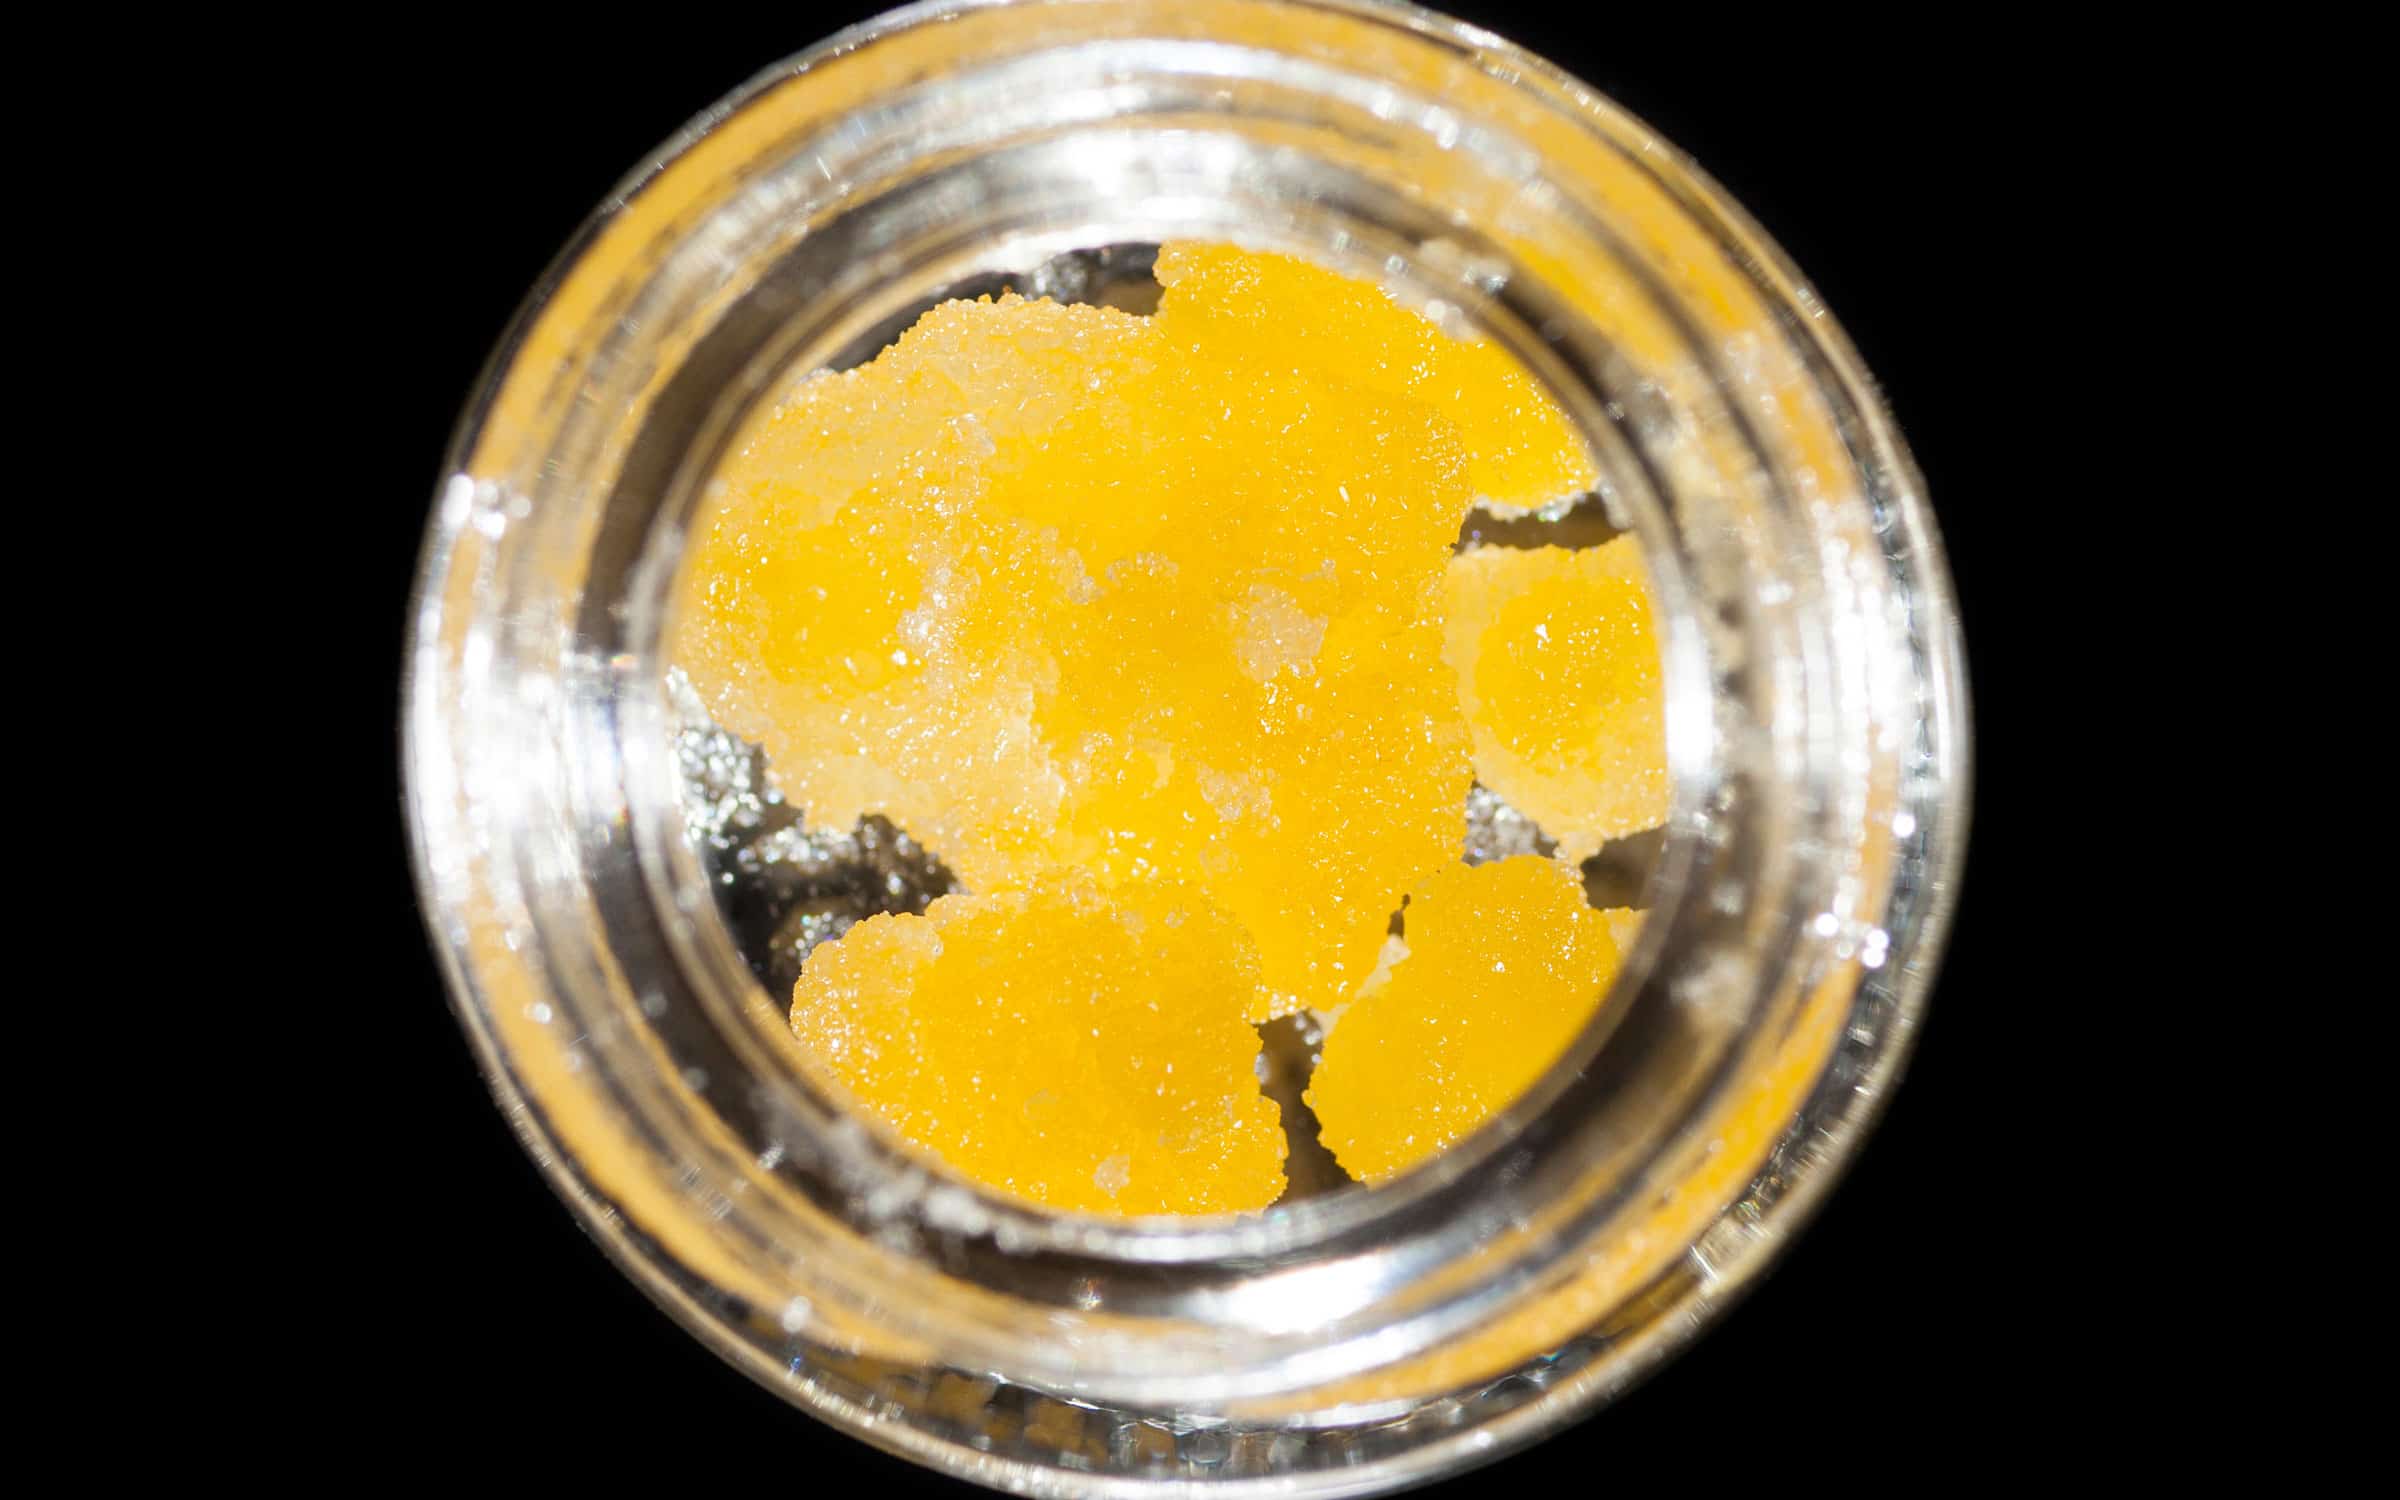 ci17_larry_og_live_resin_thca_sugar_gold_nugget_extracts_with_new_amsterdam_naturals